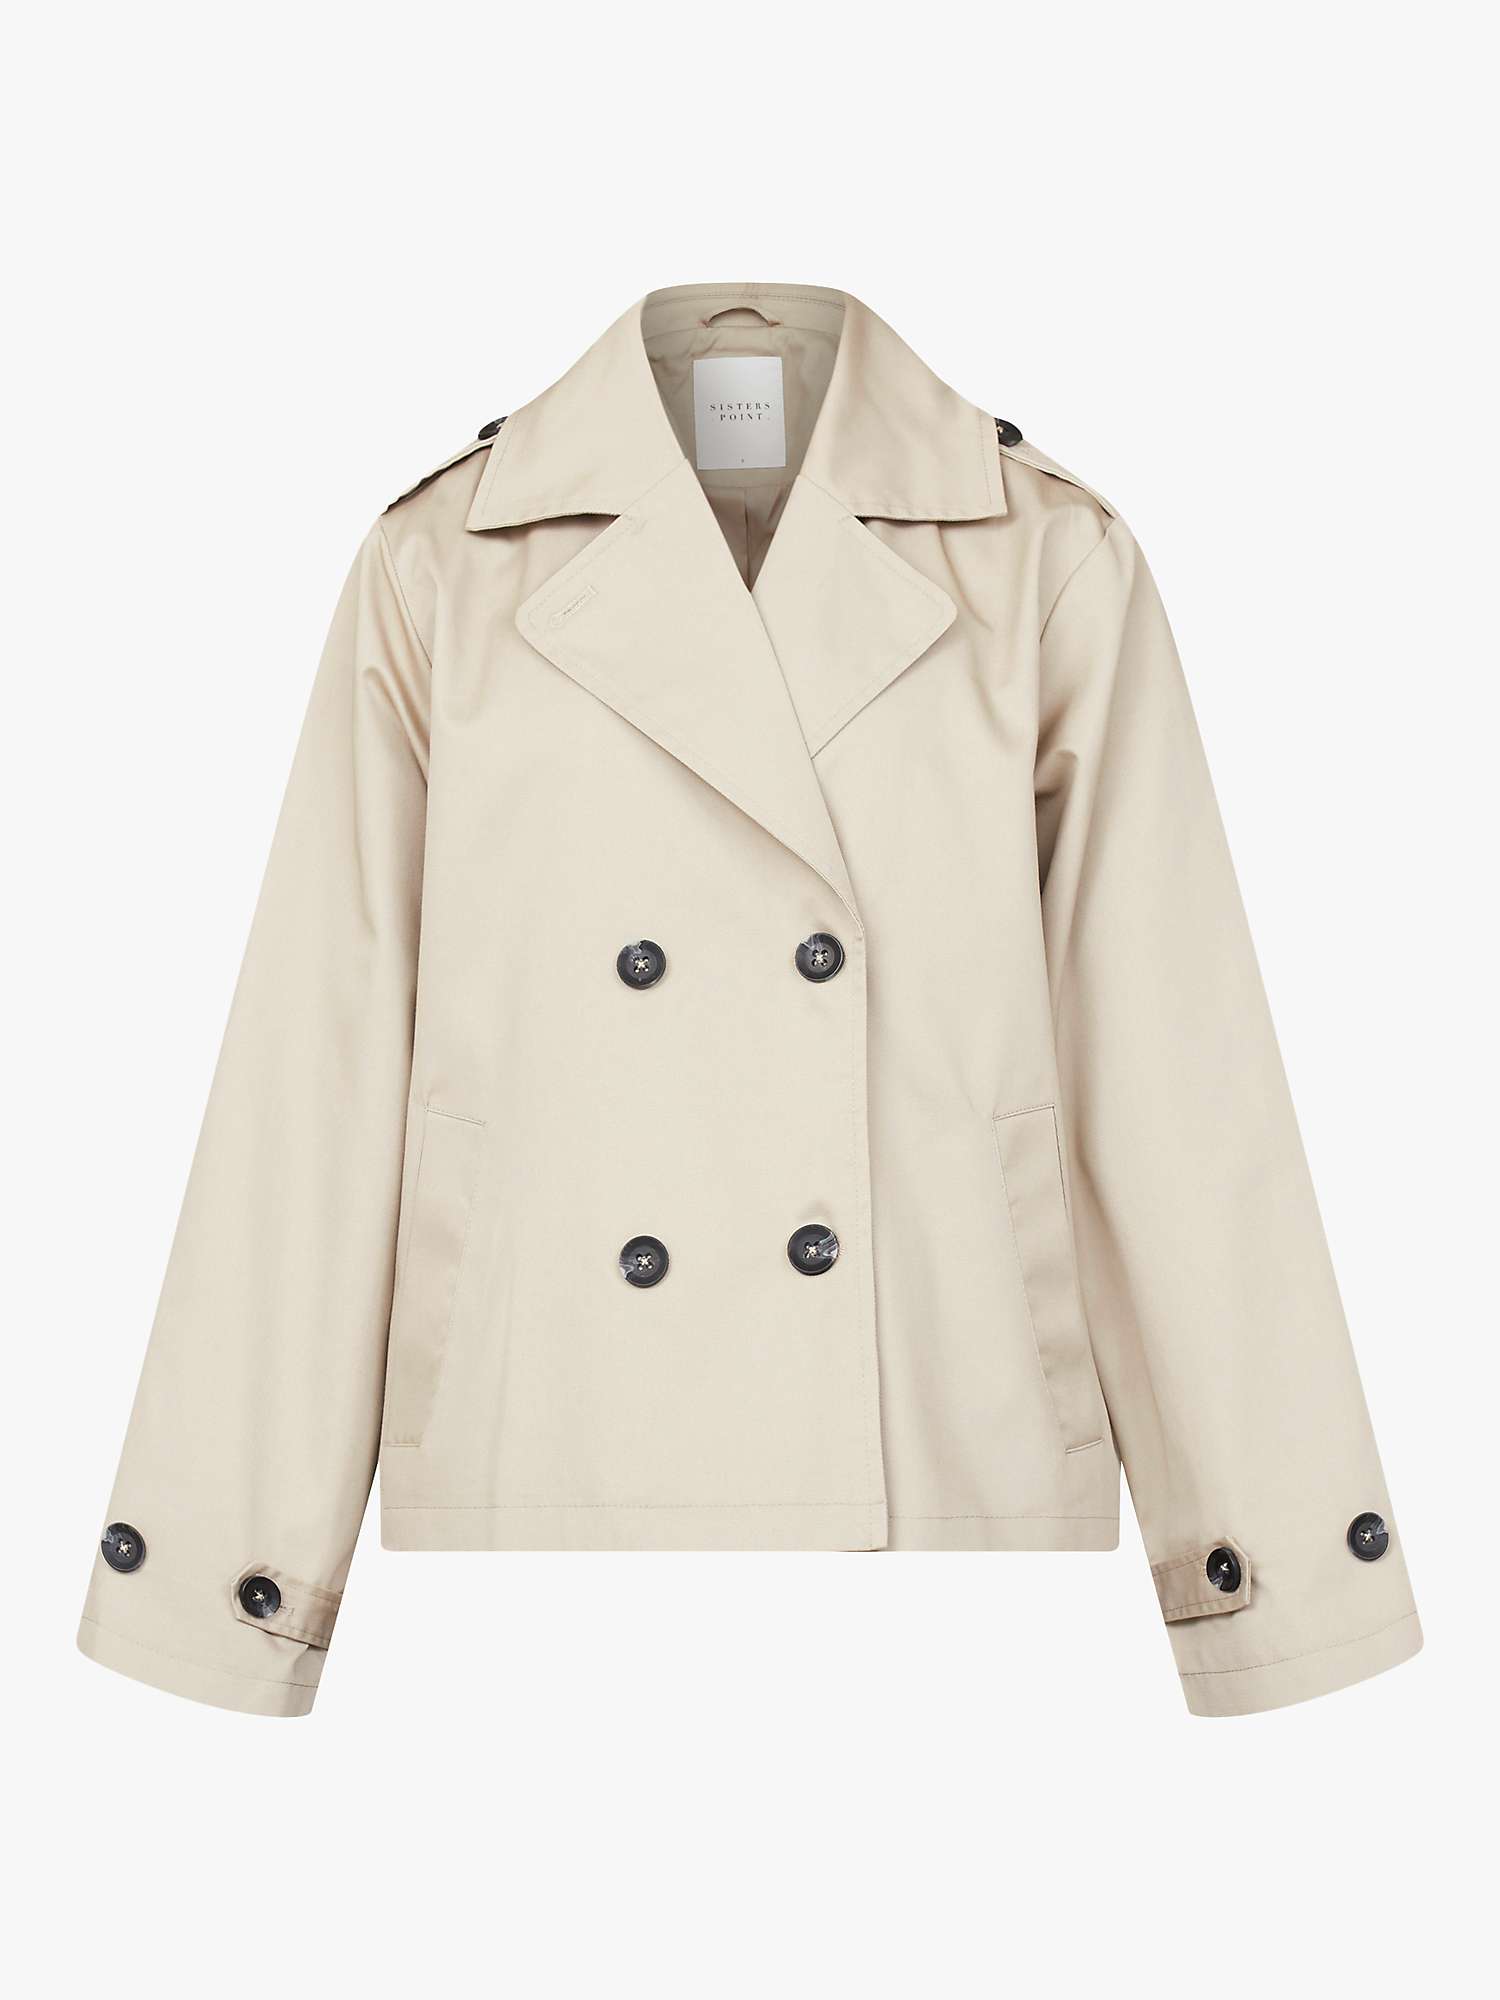 Buy Sisters Point Dar Short Classic Trench Coat, Sand Online at johnlewis.com